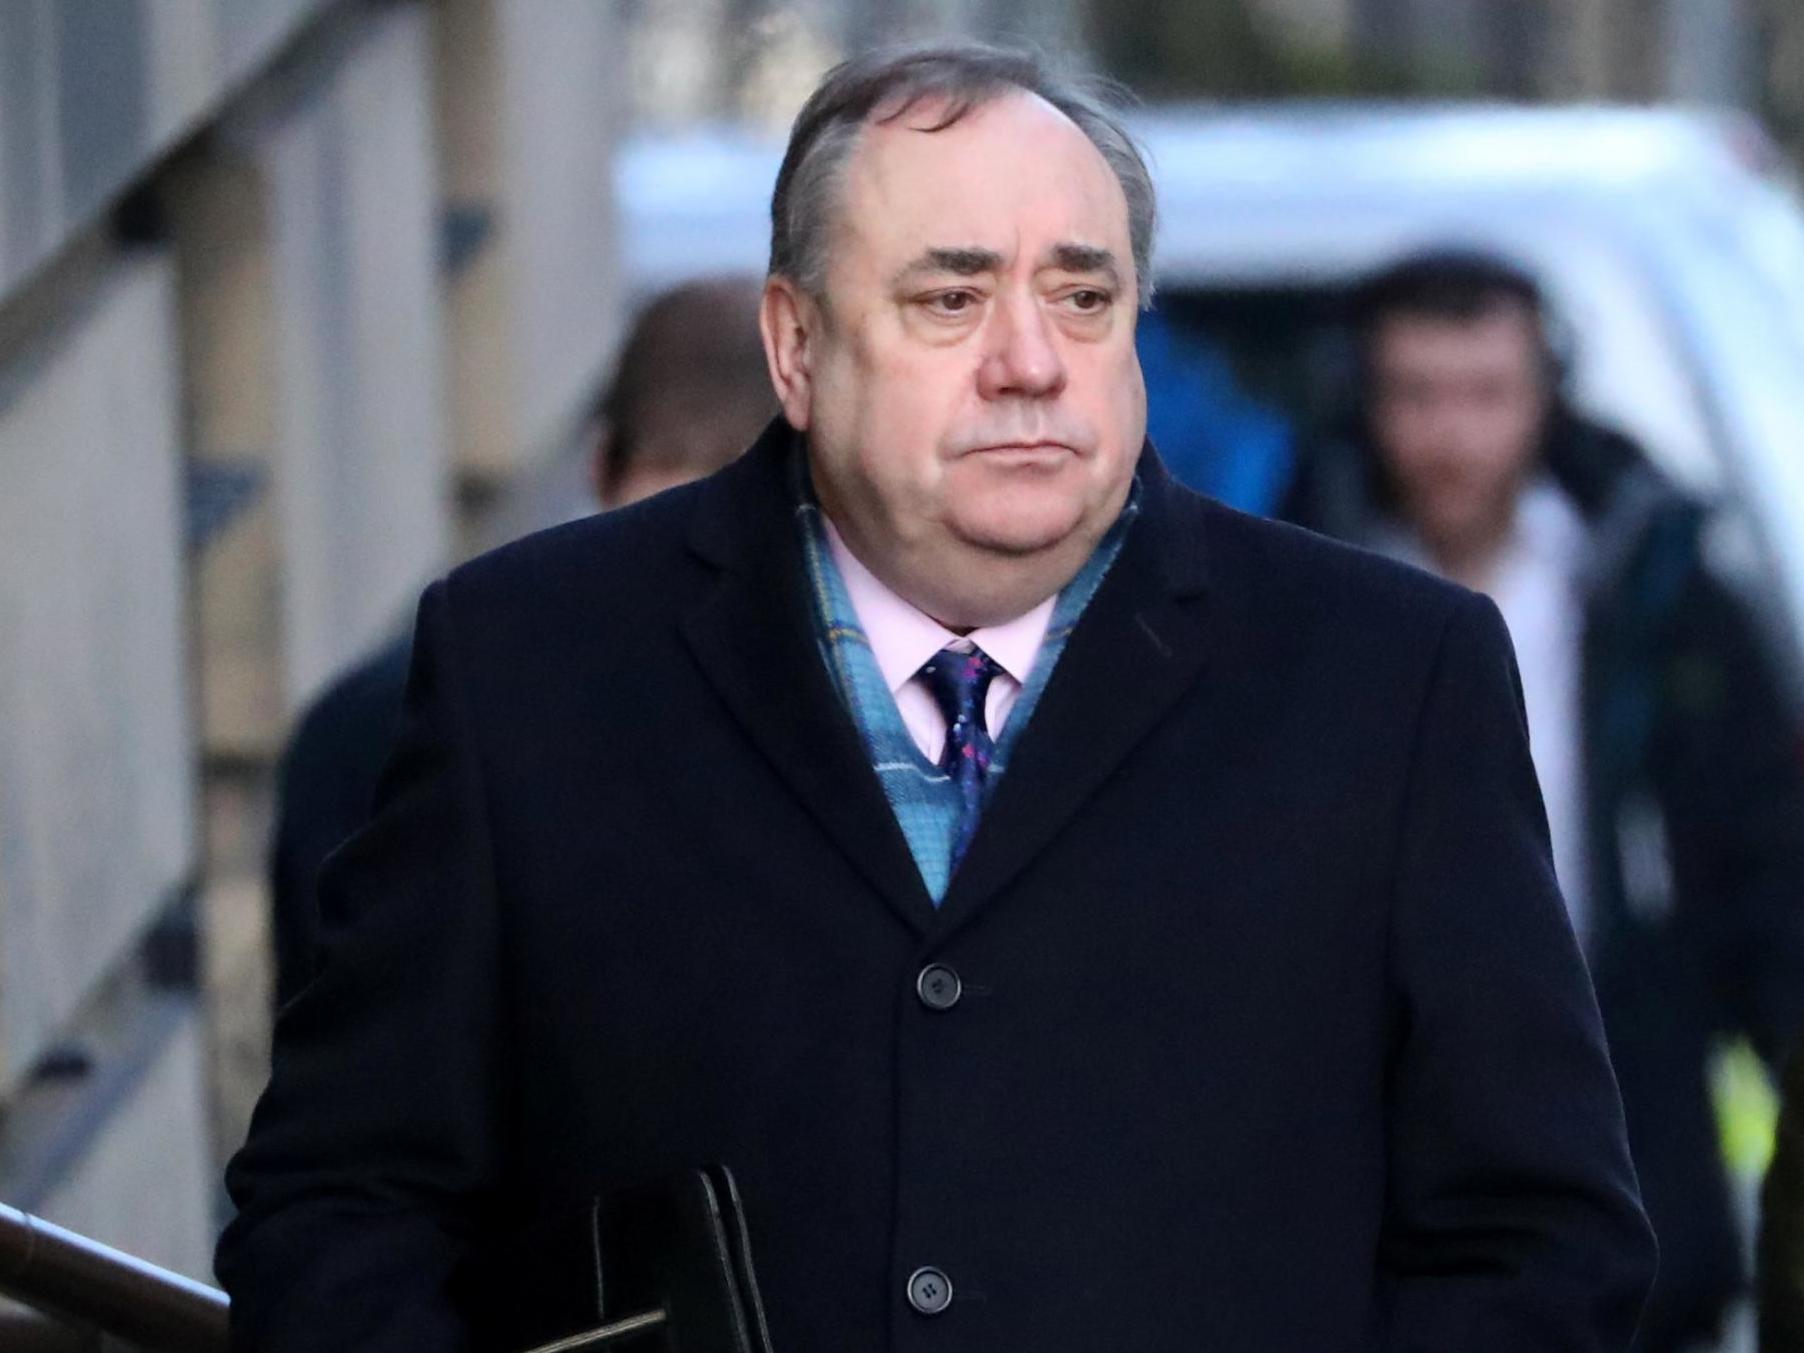 Alex Salmond faces 13 charges of alleged sexual offences against 9 women